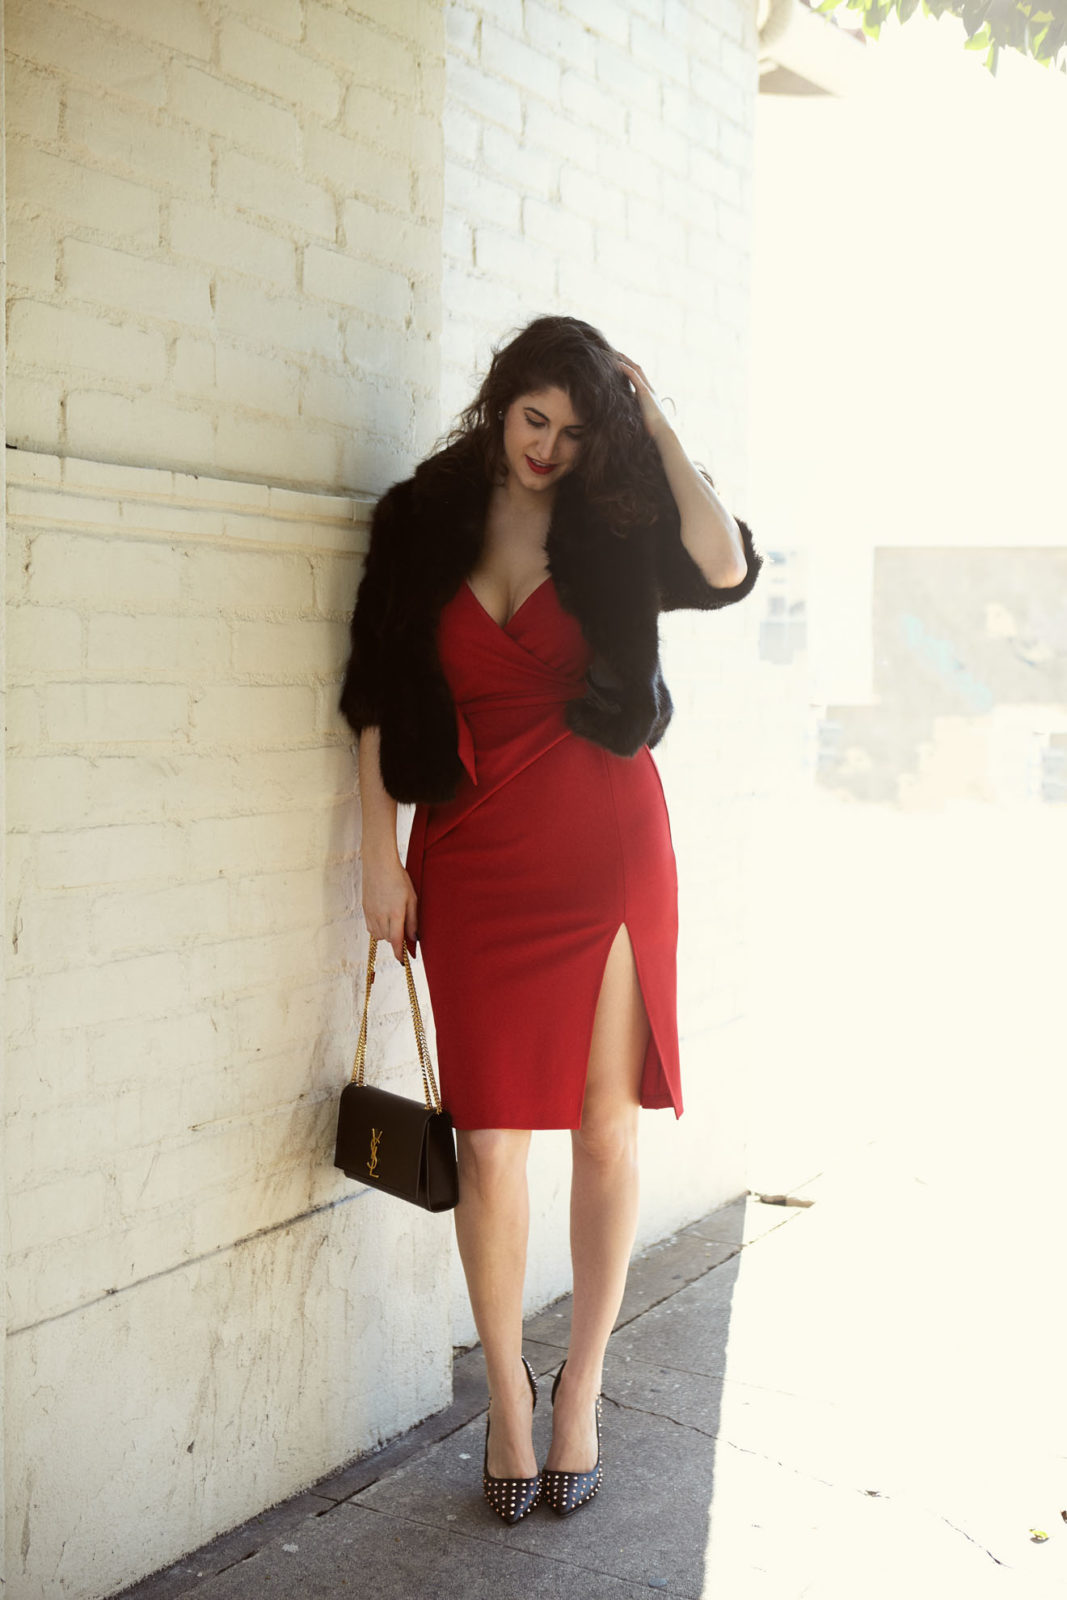 Last Minute Gifts for Valentine's Day by Los Angeles Fashion Blogger Laura Lily, red asos dress | The Best Faux Fur Coats This Season by popular Los Angeles fashion blogger, Laura Lily: image of a woman wearing a faux fur coat. 